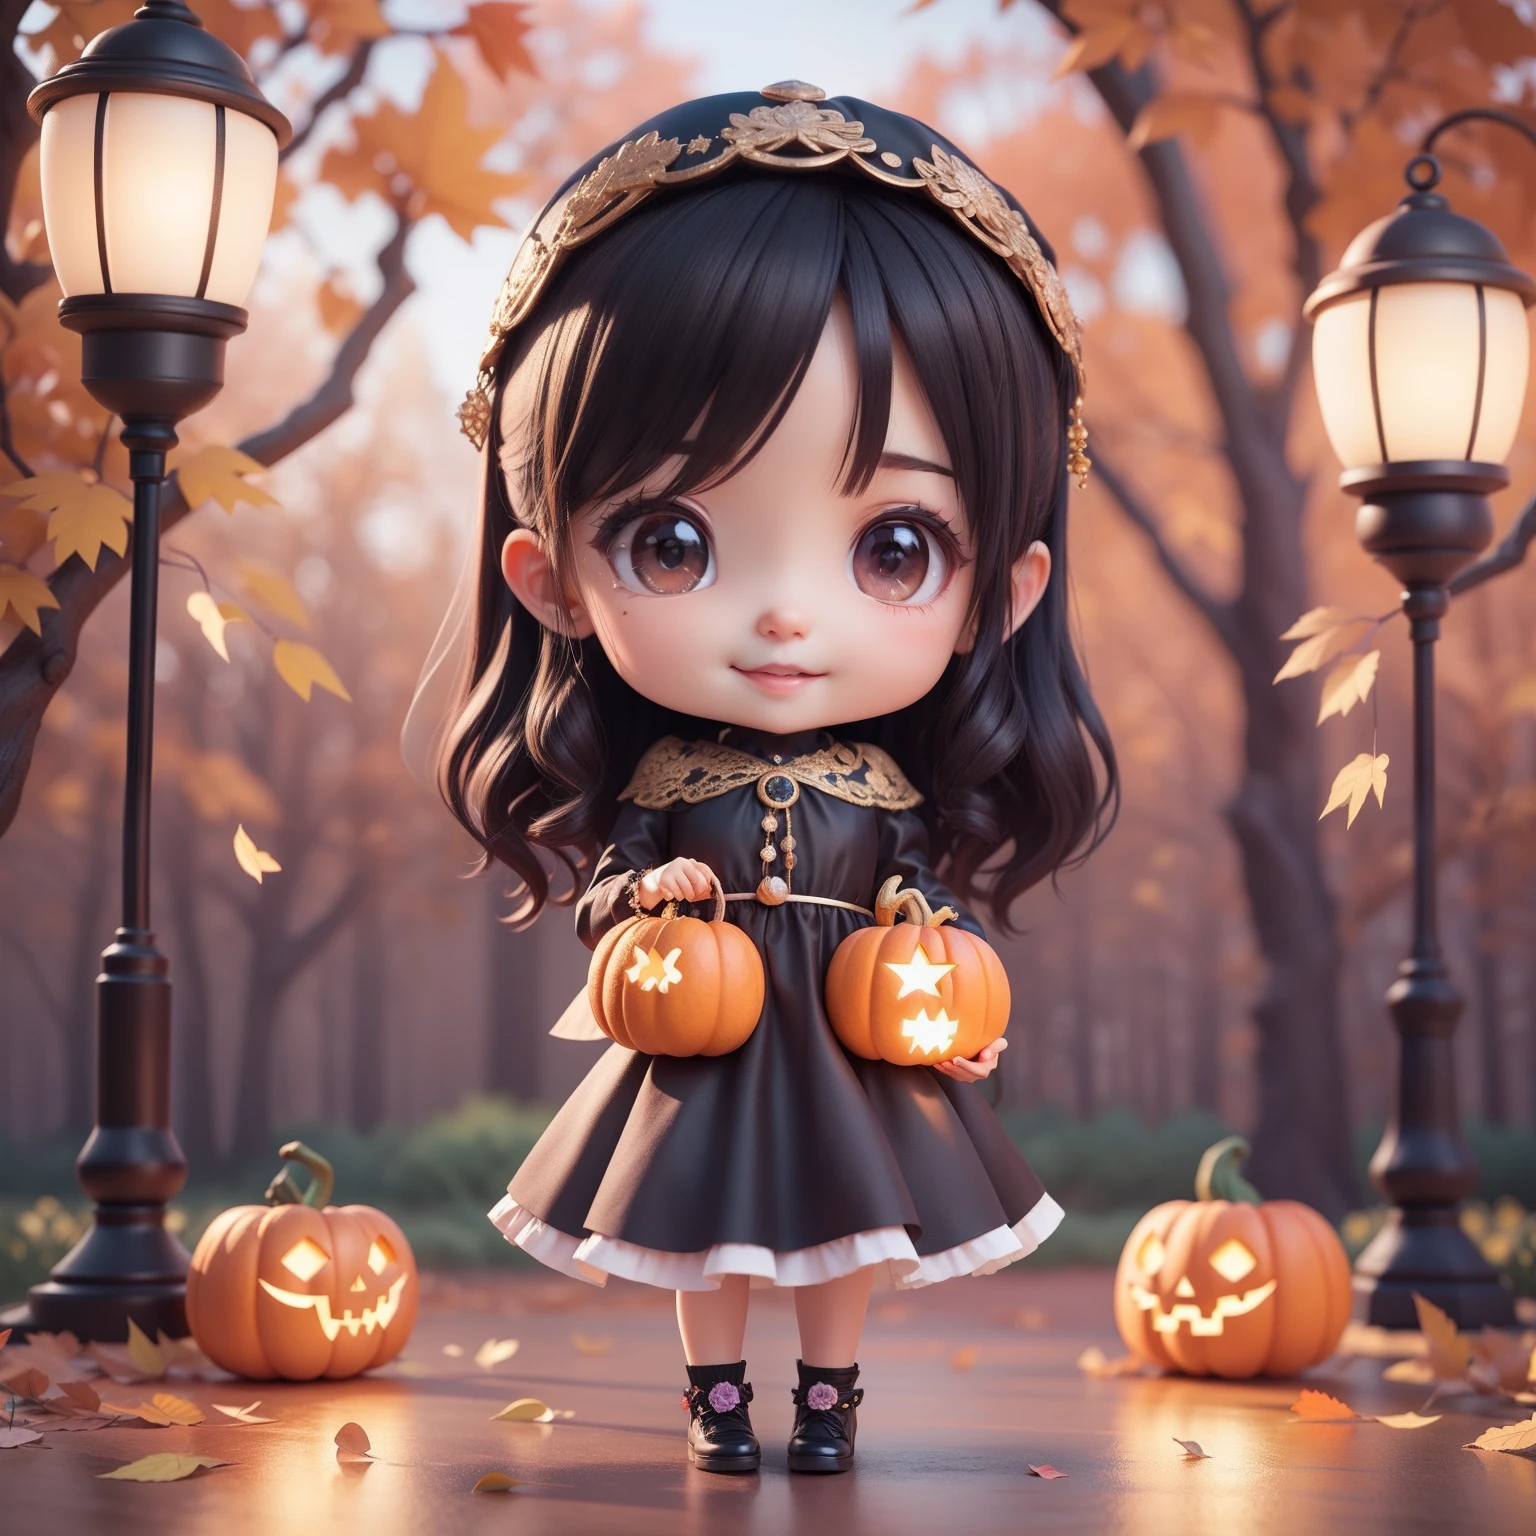 Cute Baby Chibi Anime,(((Chibi 3D))) (Best Quality) (Master Price)、Chibi Model、Black and purple retro dress、Black hair veil with luxurious jewels、Autumn in the fairytale forest、Lots of realistic pumpkins、Holding a retro lantern in both hands、A detailed face、Open your mouth and smile